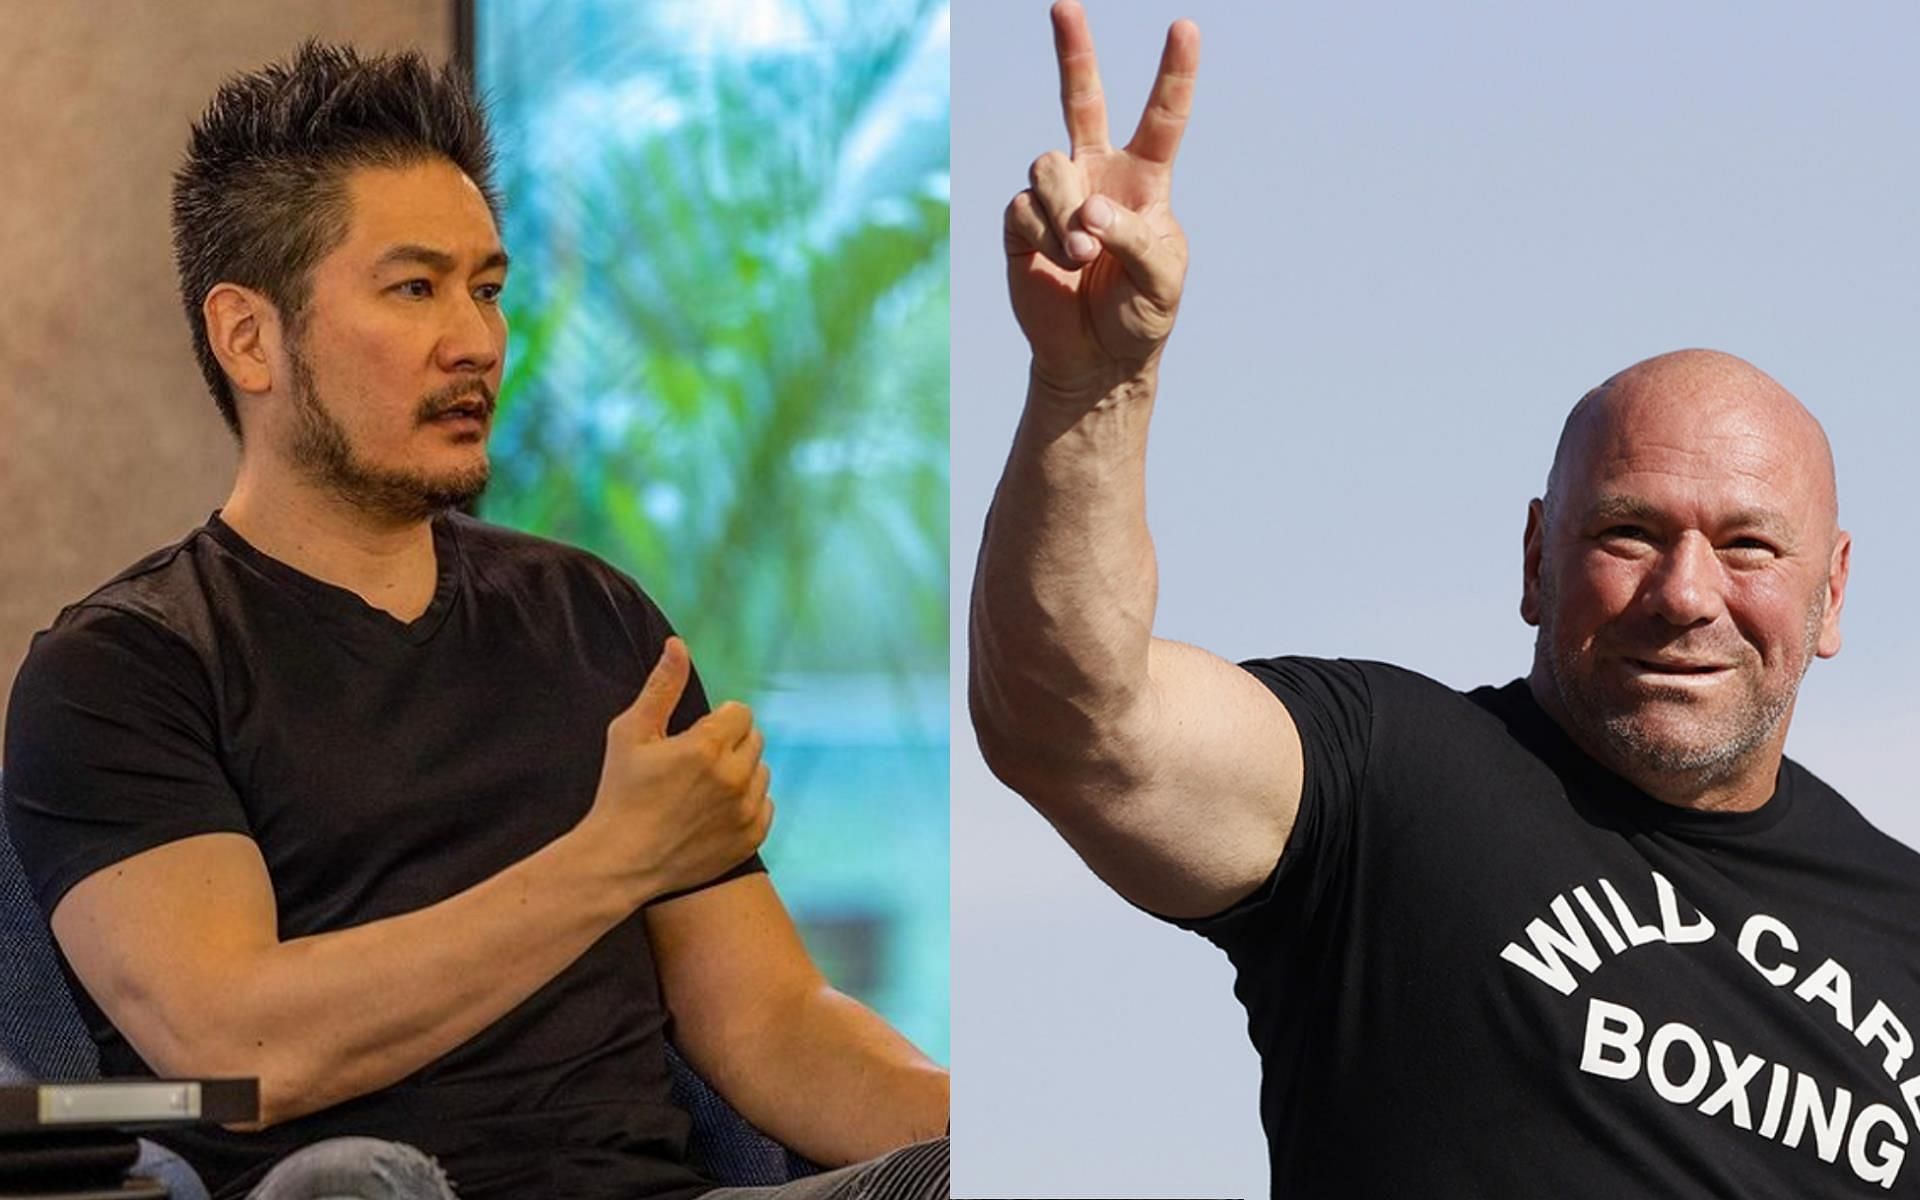 Should Chatri Sityodtong (Left) and Dana White (Right) take it to the cage? | [Photos: Instagram/Fox News]